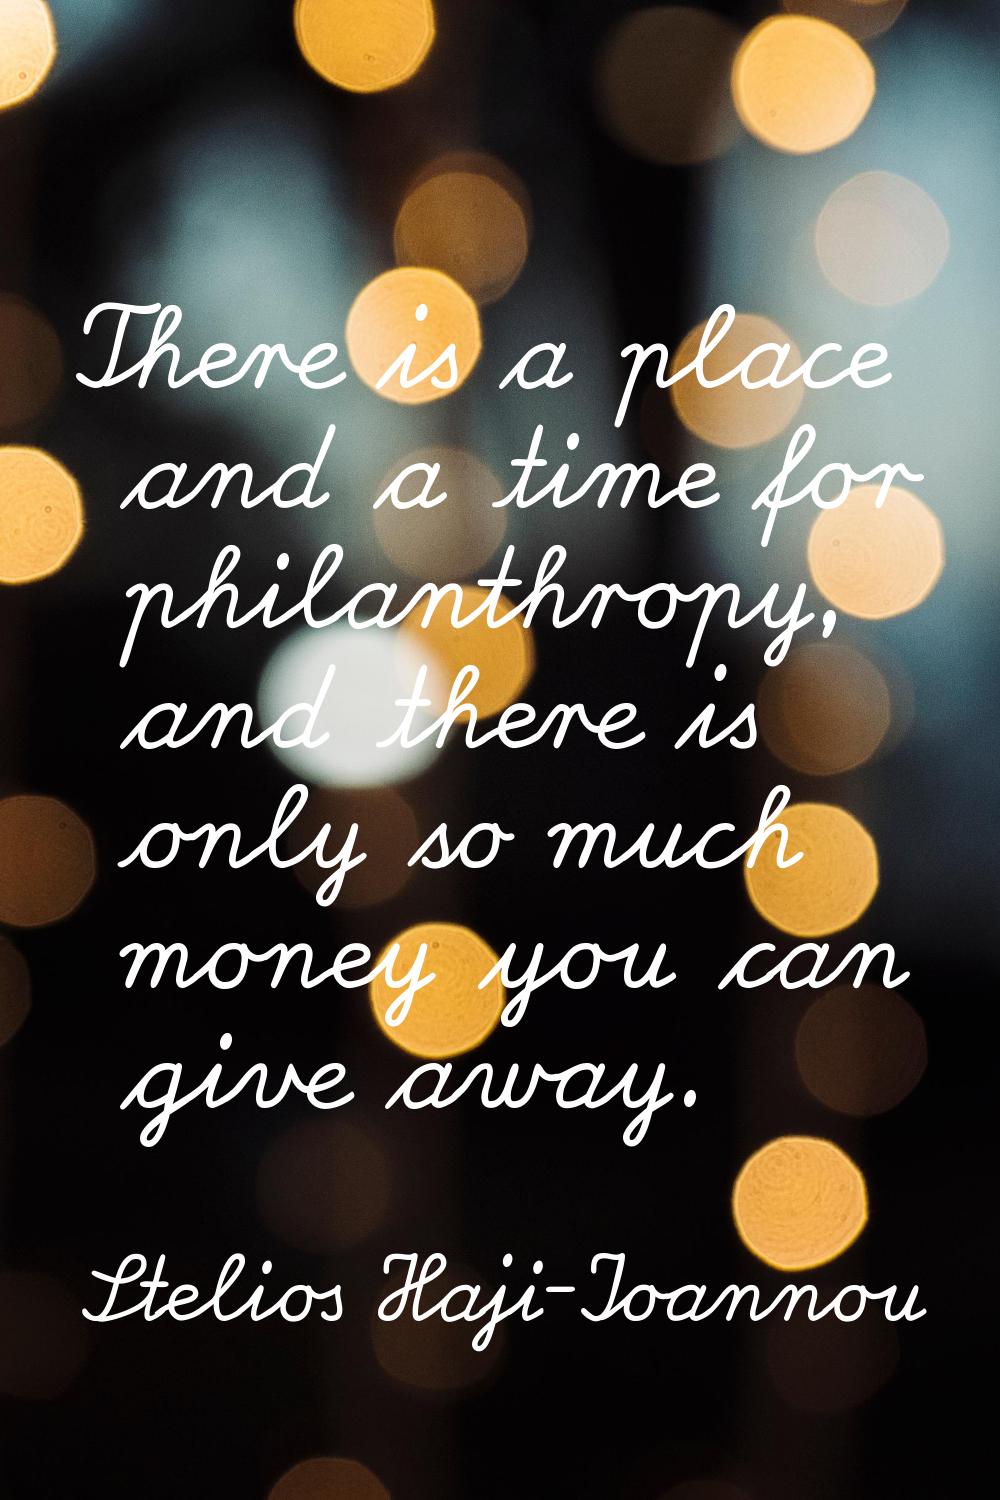 There is a place and a time for philanthropy, and there is only so much money you can give away.